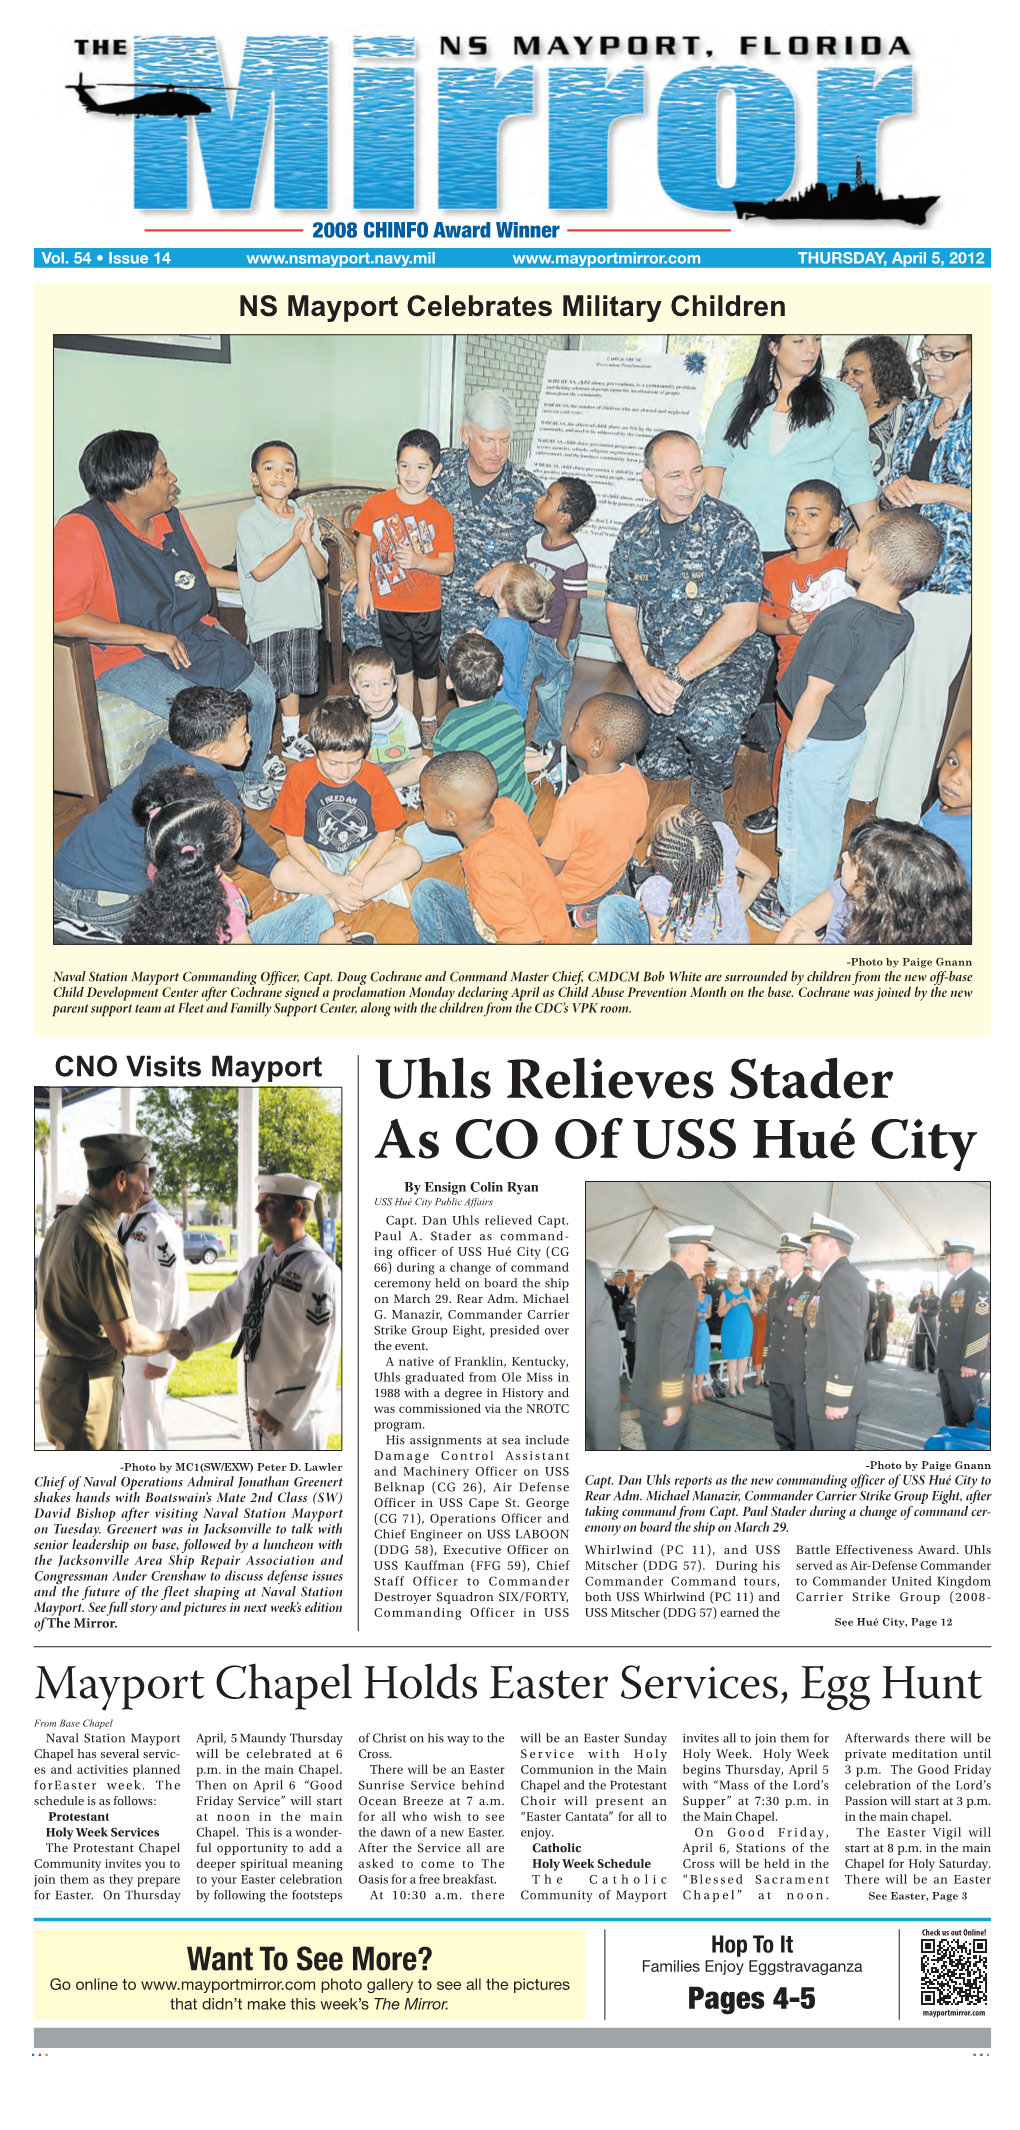 Uhls Relieves Stader As CO of USS Hué City by Ensign Colin Ryan USS Hué City Public Affairs Capt